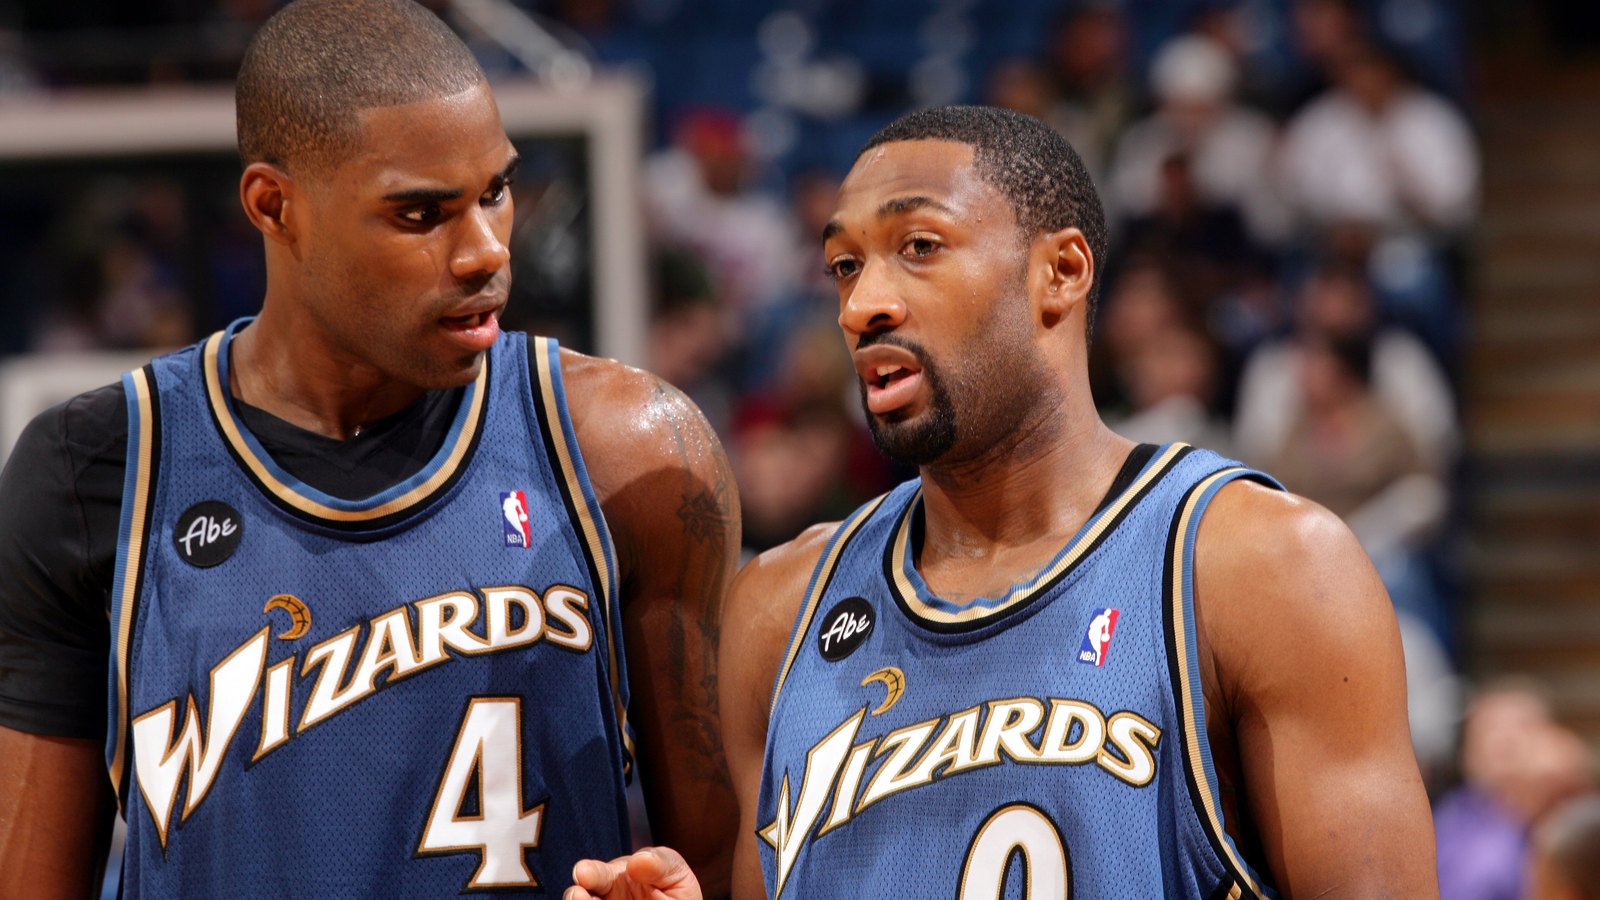 I could hear the top rafters, Gilbert Arenas empathizes with